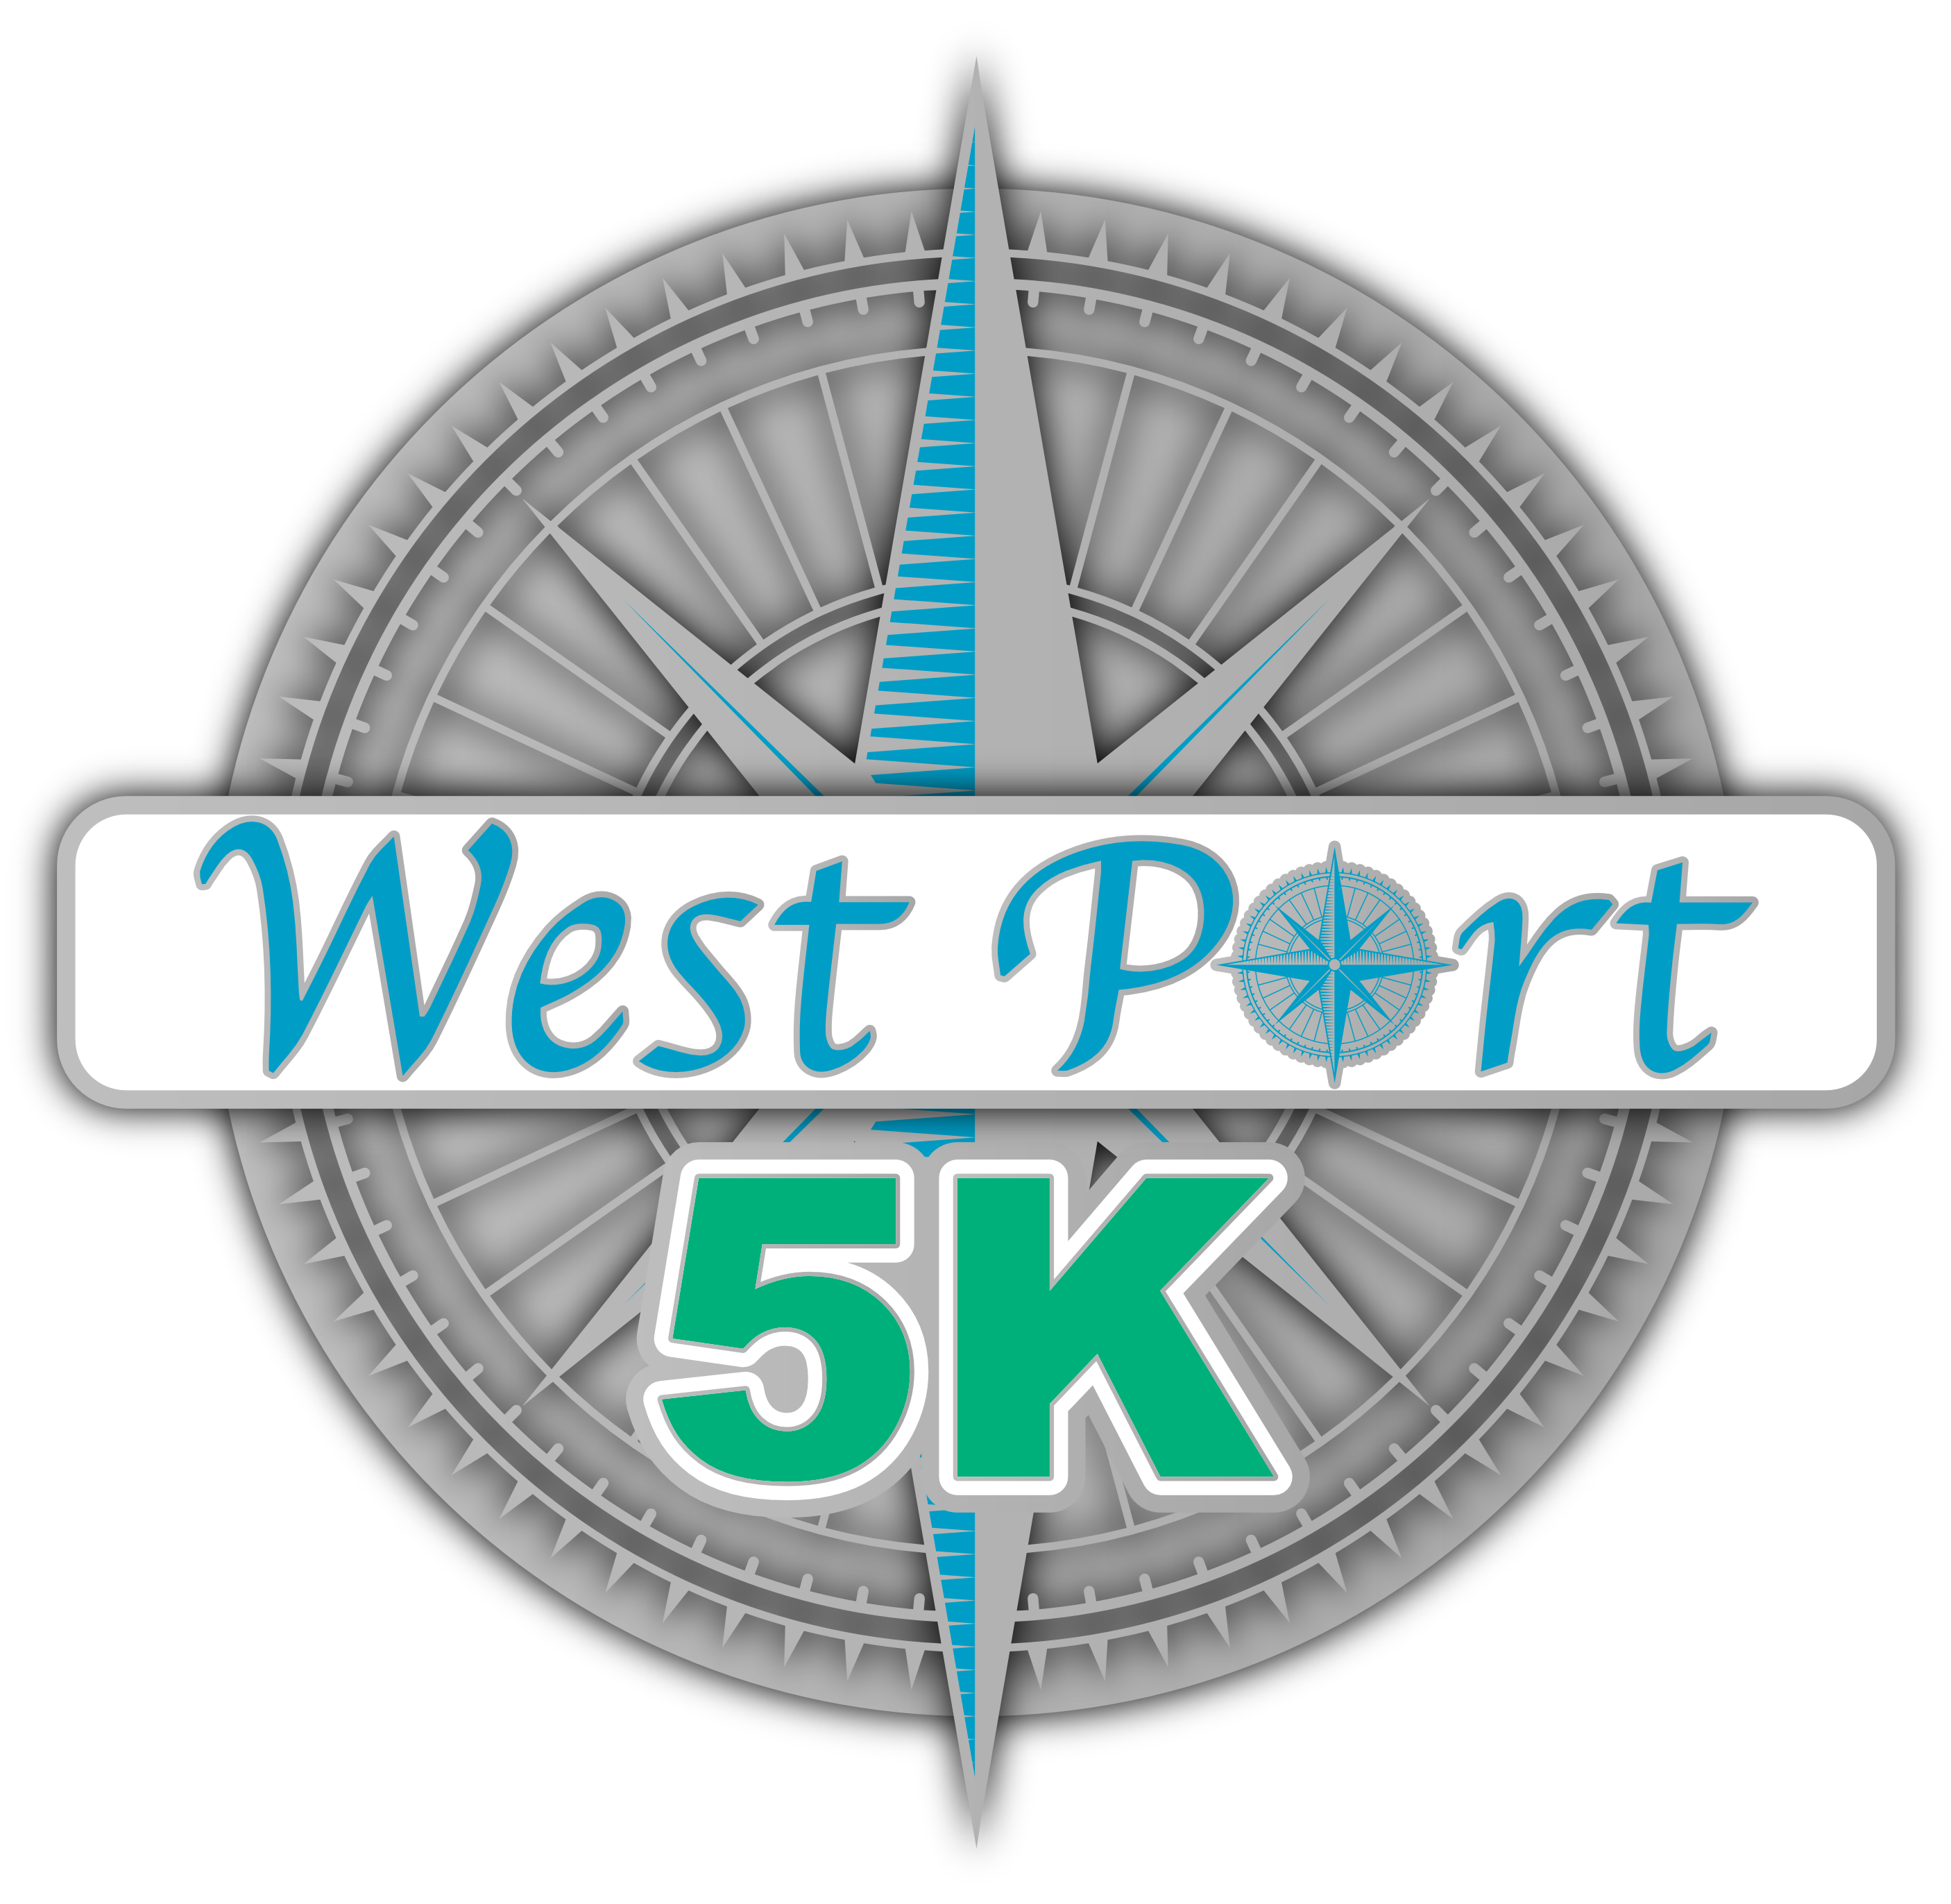 My Favorite Race Events Presents the West Port 5K